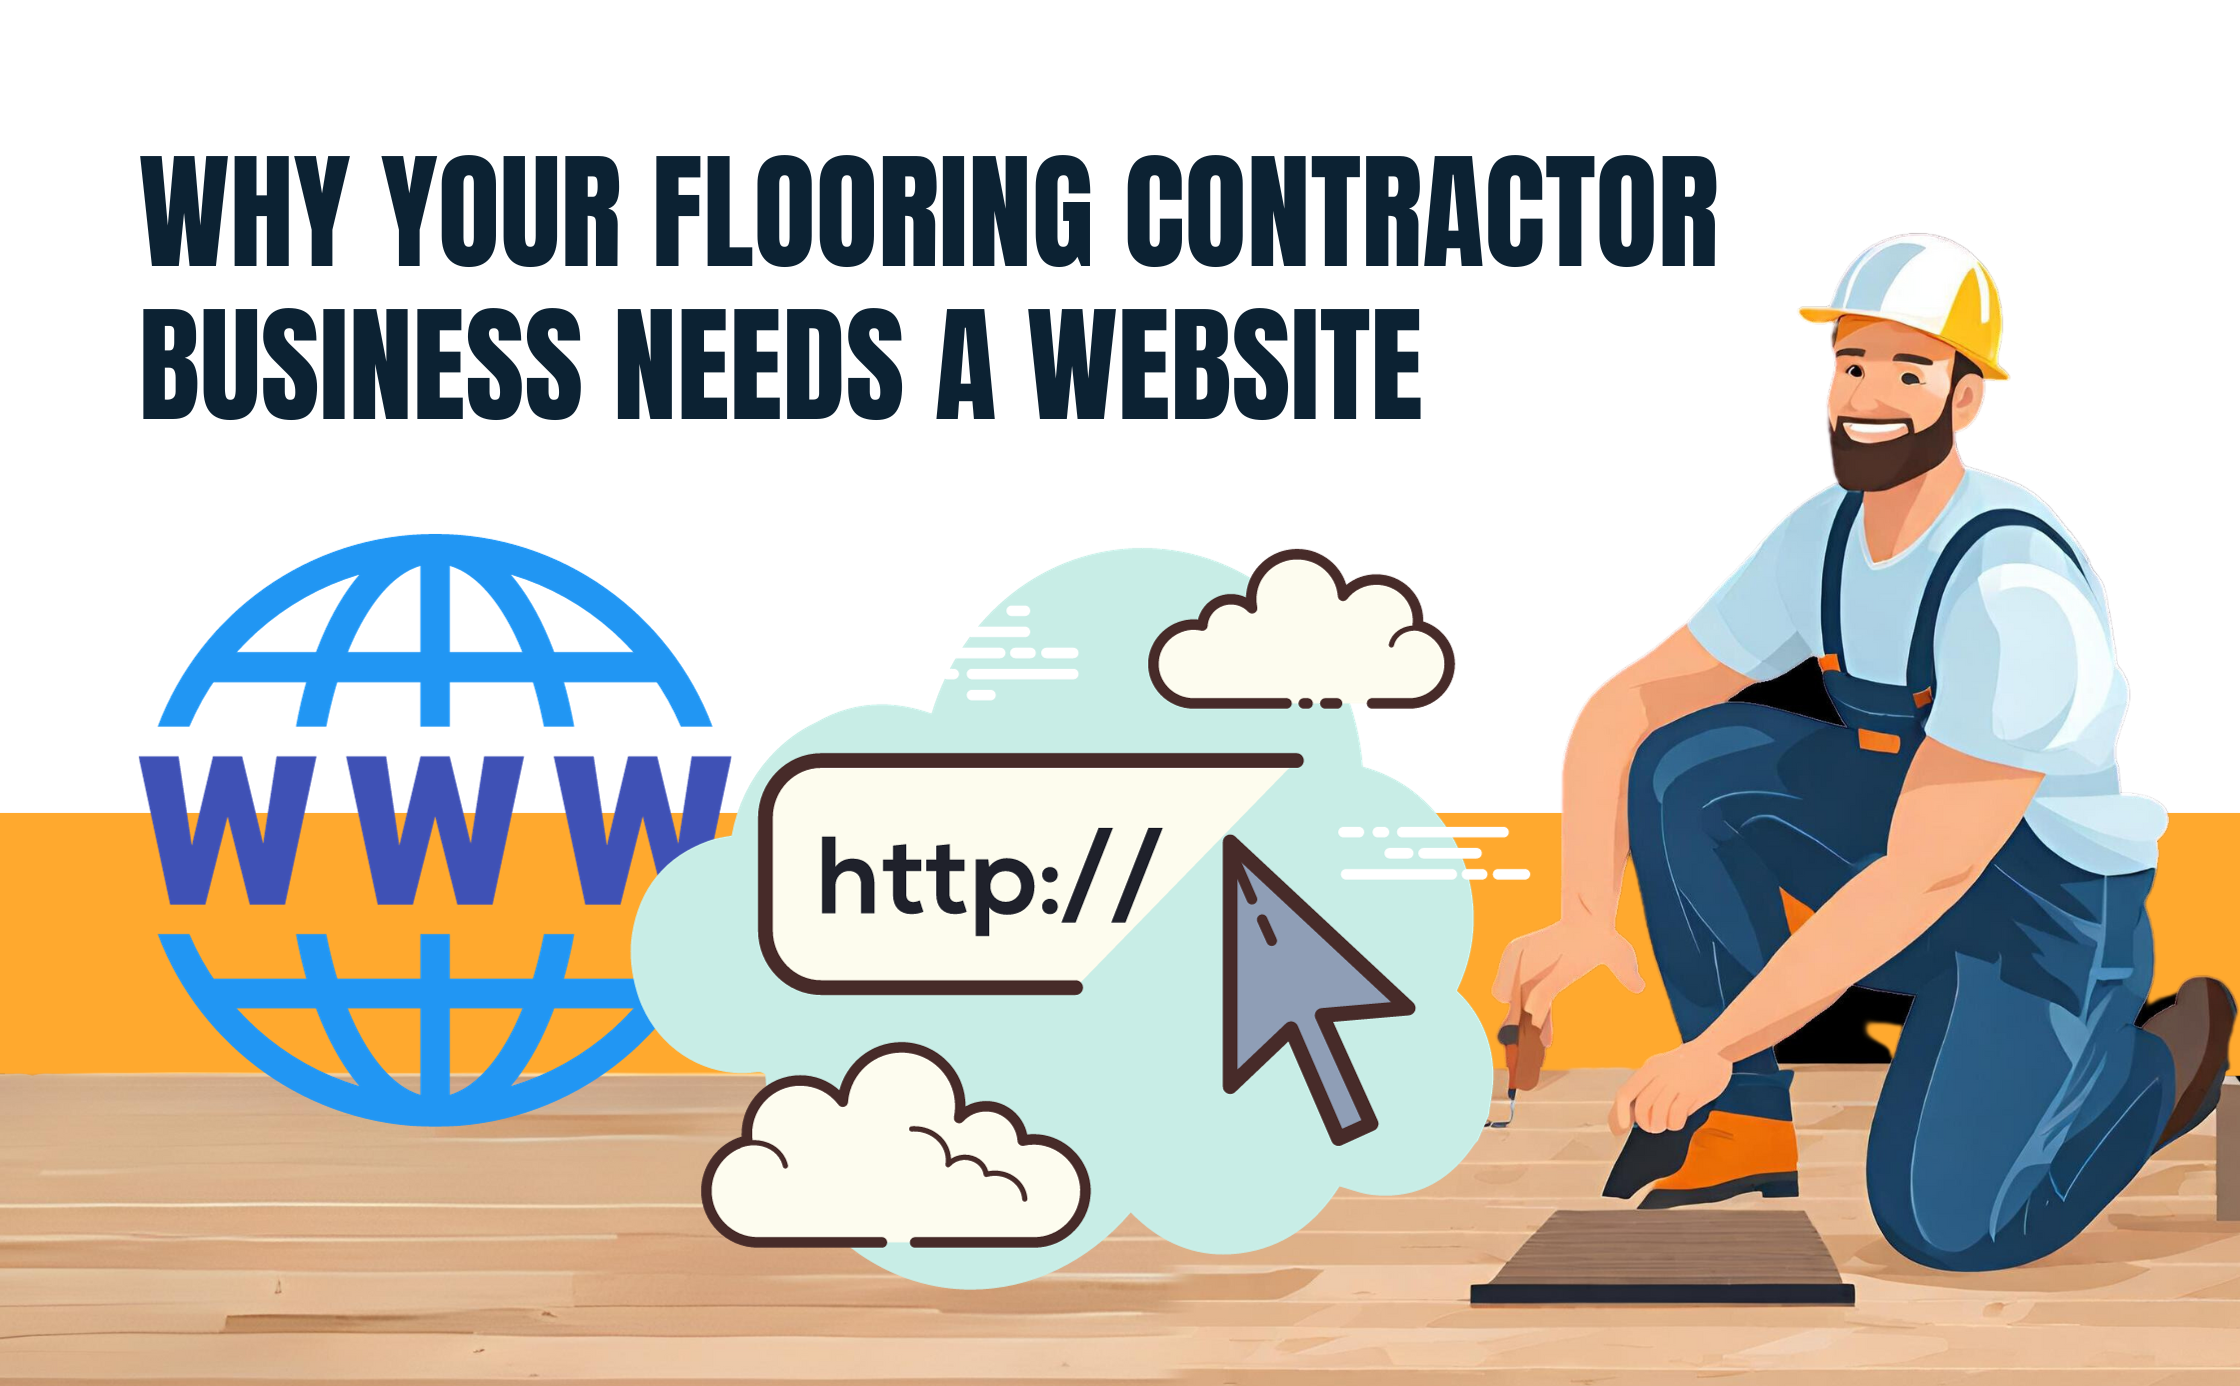 Why Your Flooring Contractor Business Needs a Website